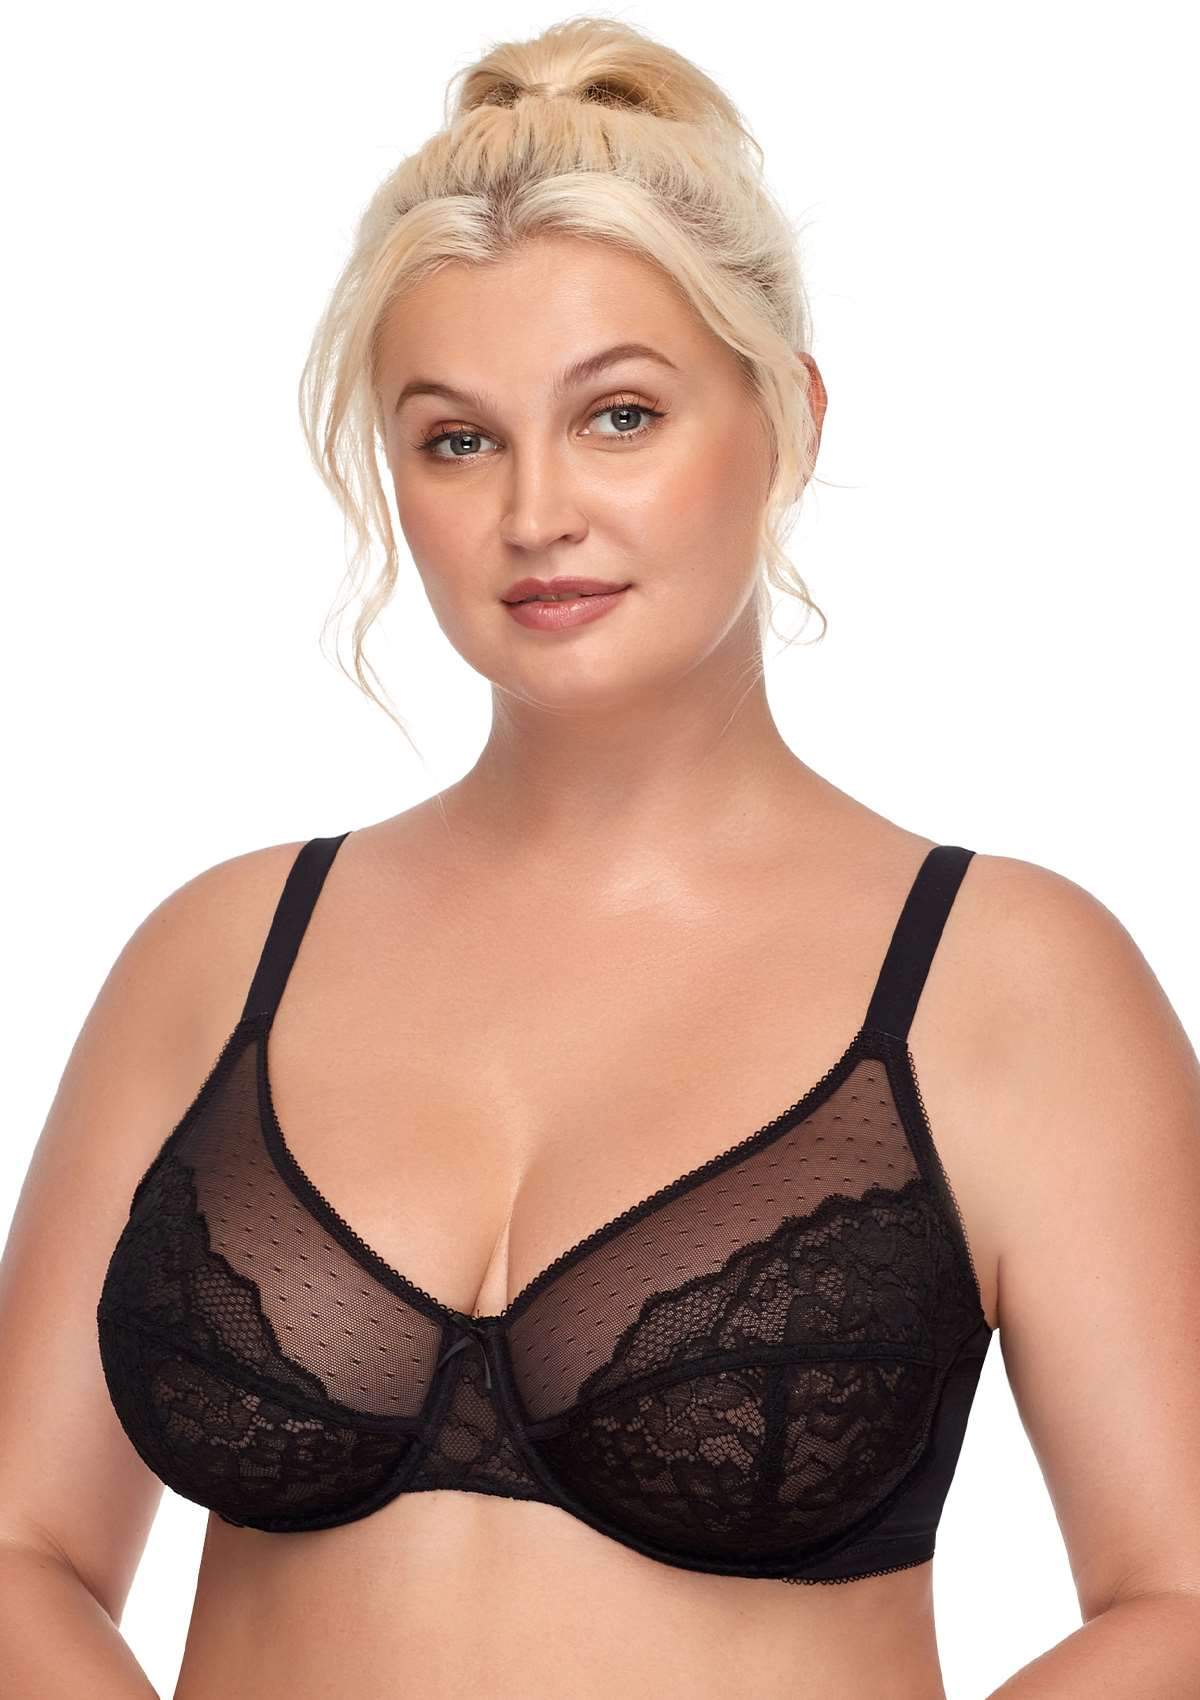 HSIA Enchante Lace Wire Bra For Lifting And Separating Large Breasts - Black / 36 / D